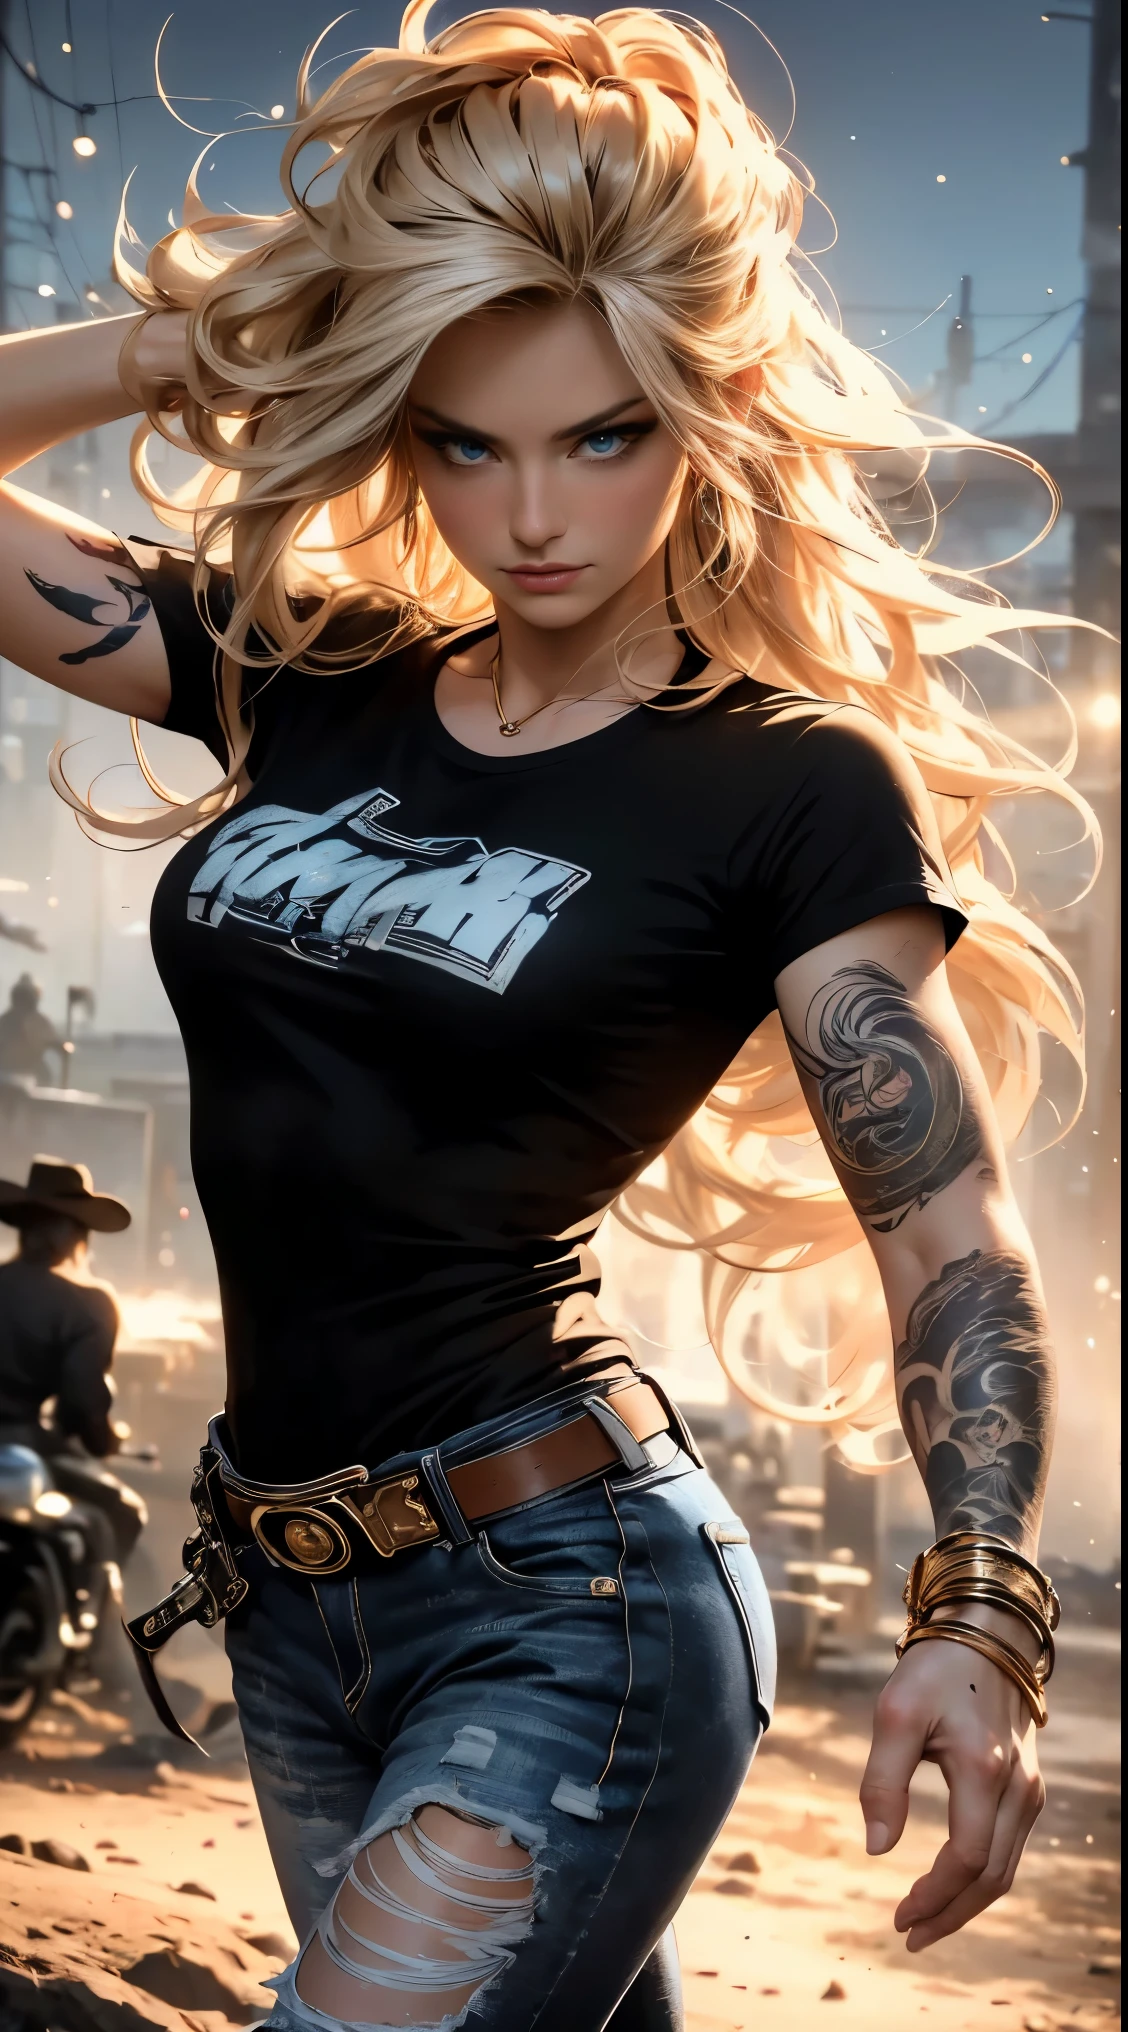 masterpiece, Cowboy shot, (1woman), (golden hairs), (Black tshirt:1.2), (beautiful blue eyes), (tribal tattoo on hands), White, Orange and Blue colors, Foggy background, Graceful pose, (looking at viewer), (front view), (from sky), (bokeh:1.2)